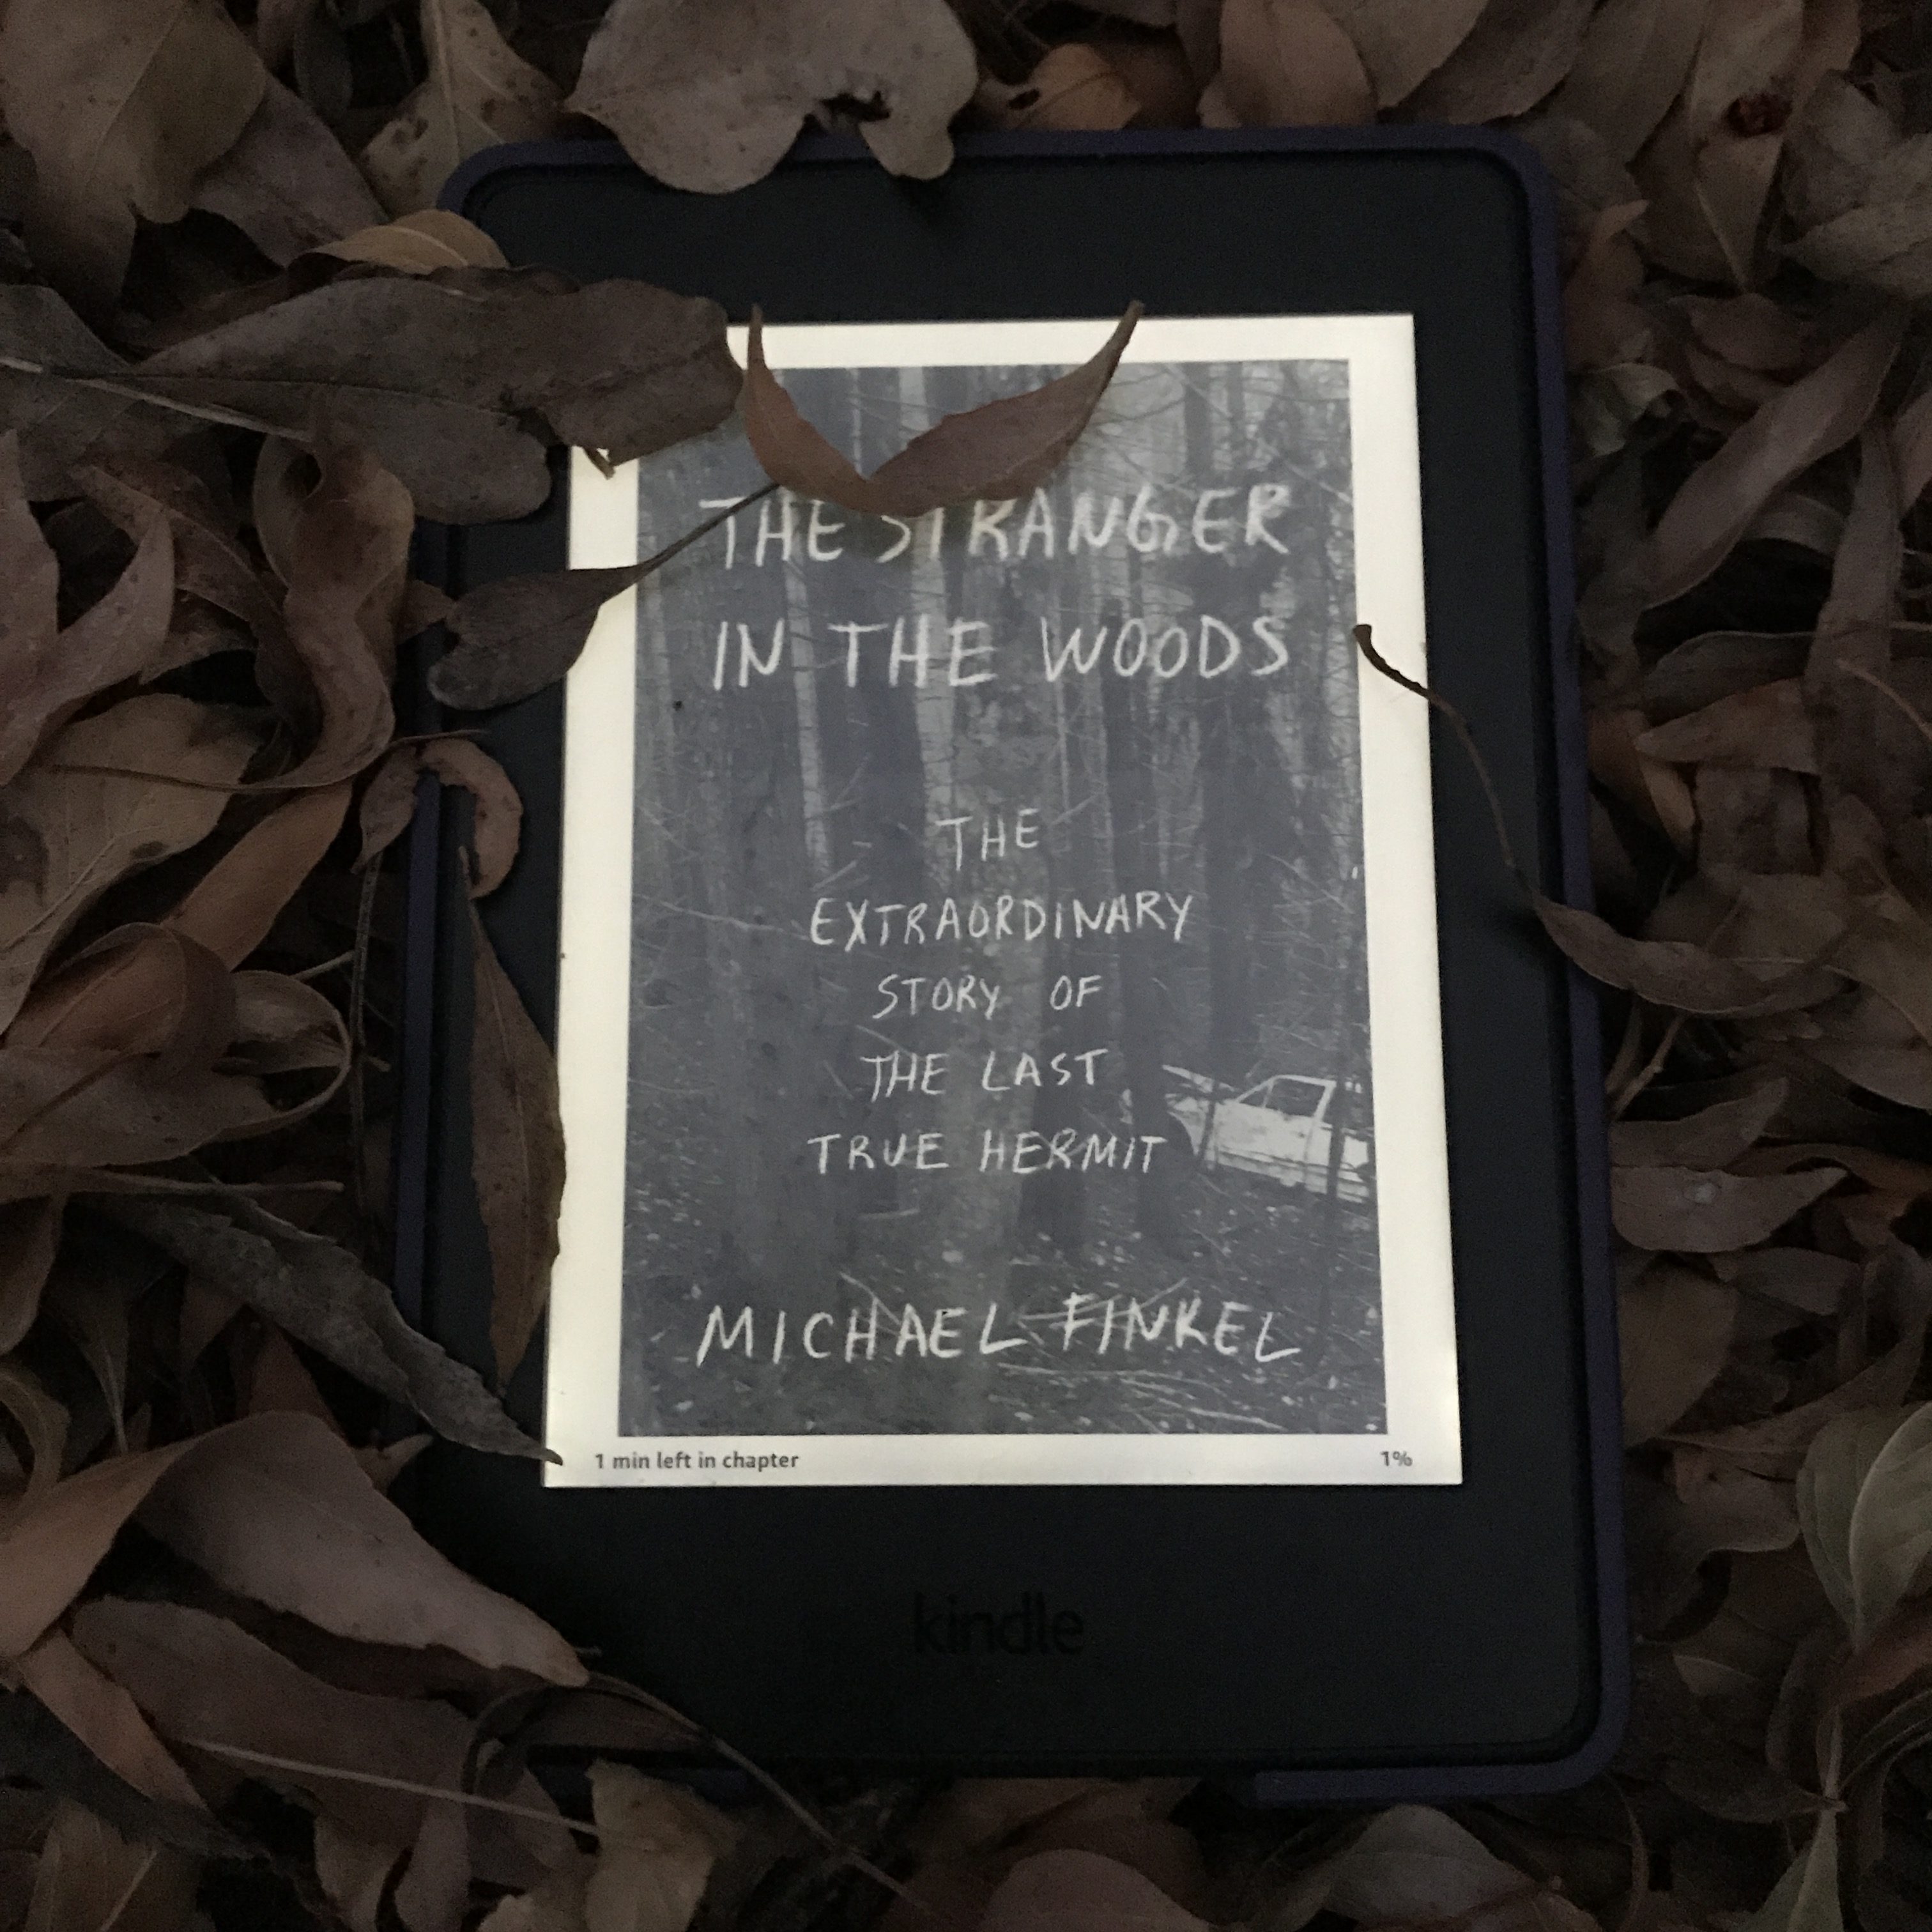 Review The Stranger in the Woods by Michael Finkel LisaAnnReads